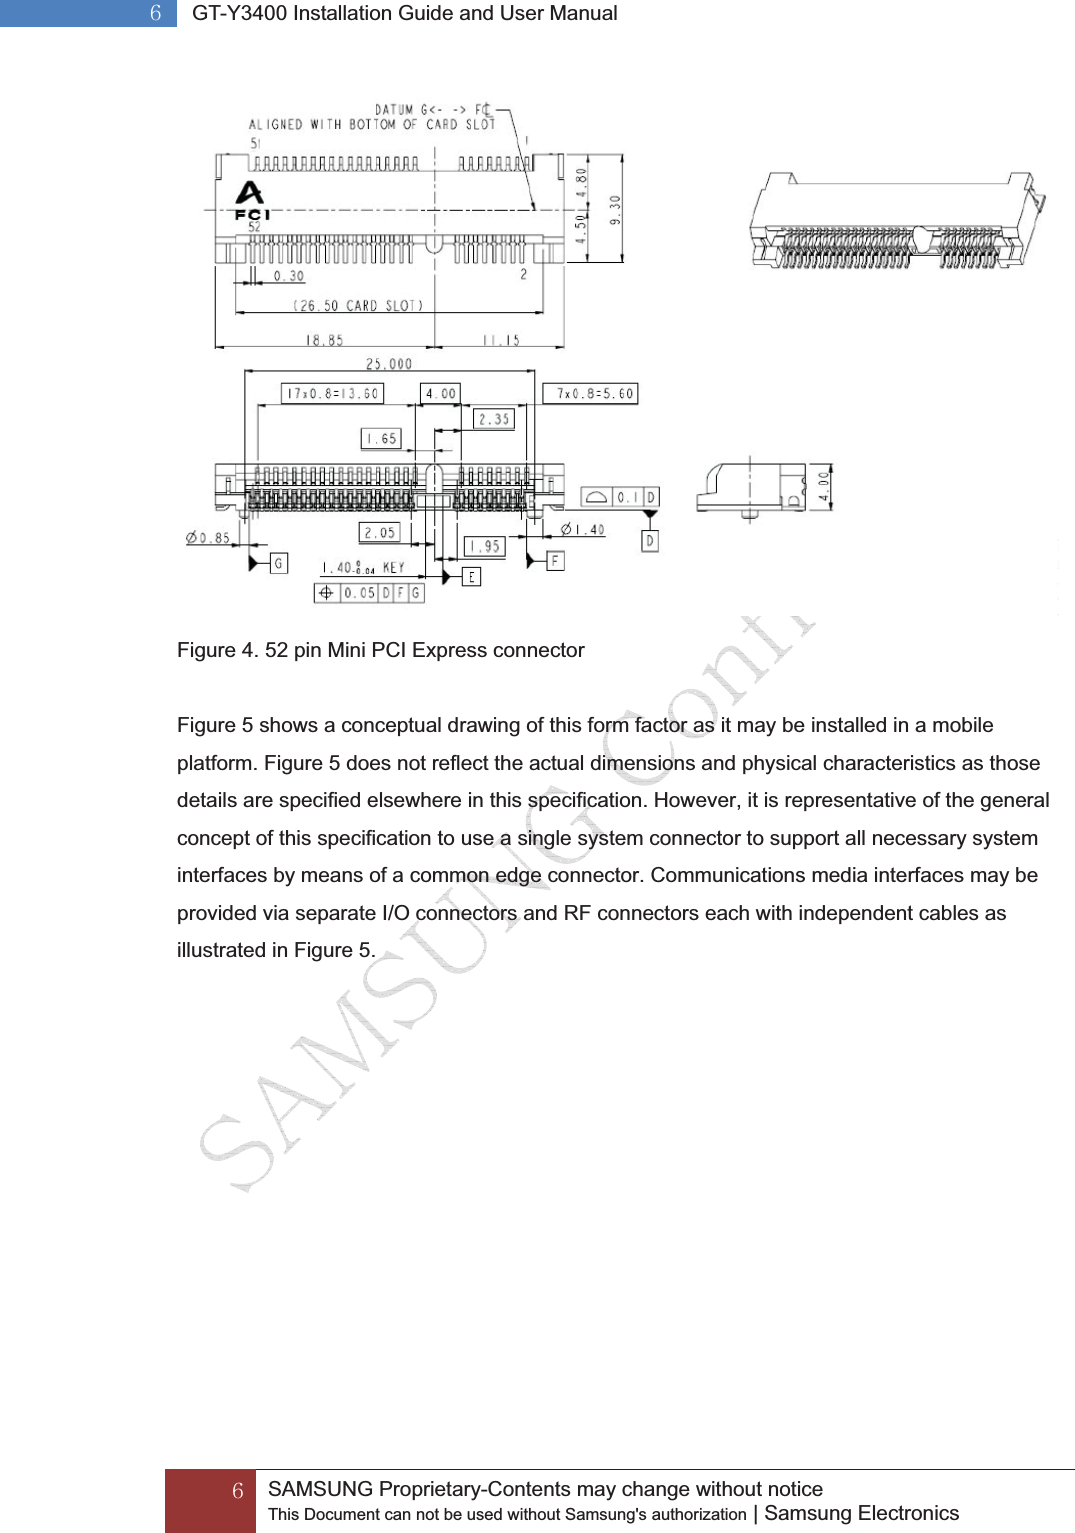 G]GGSAMSUNG Proprietary-Contents may change without notice This Document can not be used without Samsung&apos;s authorization | Samsung Electronics G]G GT-Y3400 Installation Guide and User ManualGFigure 4. 52 pin Mini PCI Express connector Figure 5 shows a conceptual drawing of this form factor as it may be installed in a mobile platform. Figure 5 does not reflect the actual dimensions and physical characteristics as those details are specified elsewhere in this specification. However, it is representative of the general concept of this specification to use a single system connector to support all necessary system interfaces by means of a common edge connector. Communications media interfaces may be provided via separate I/O connectors and RF connectors each with independent cables as illustrated in Figure 5. 